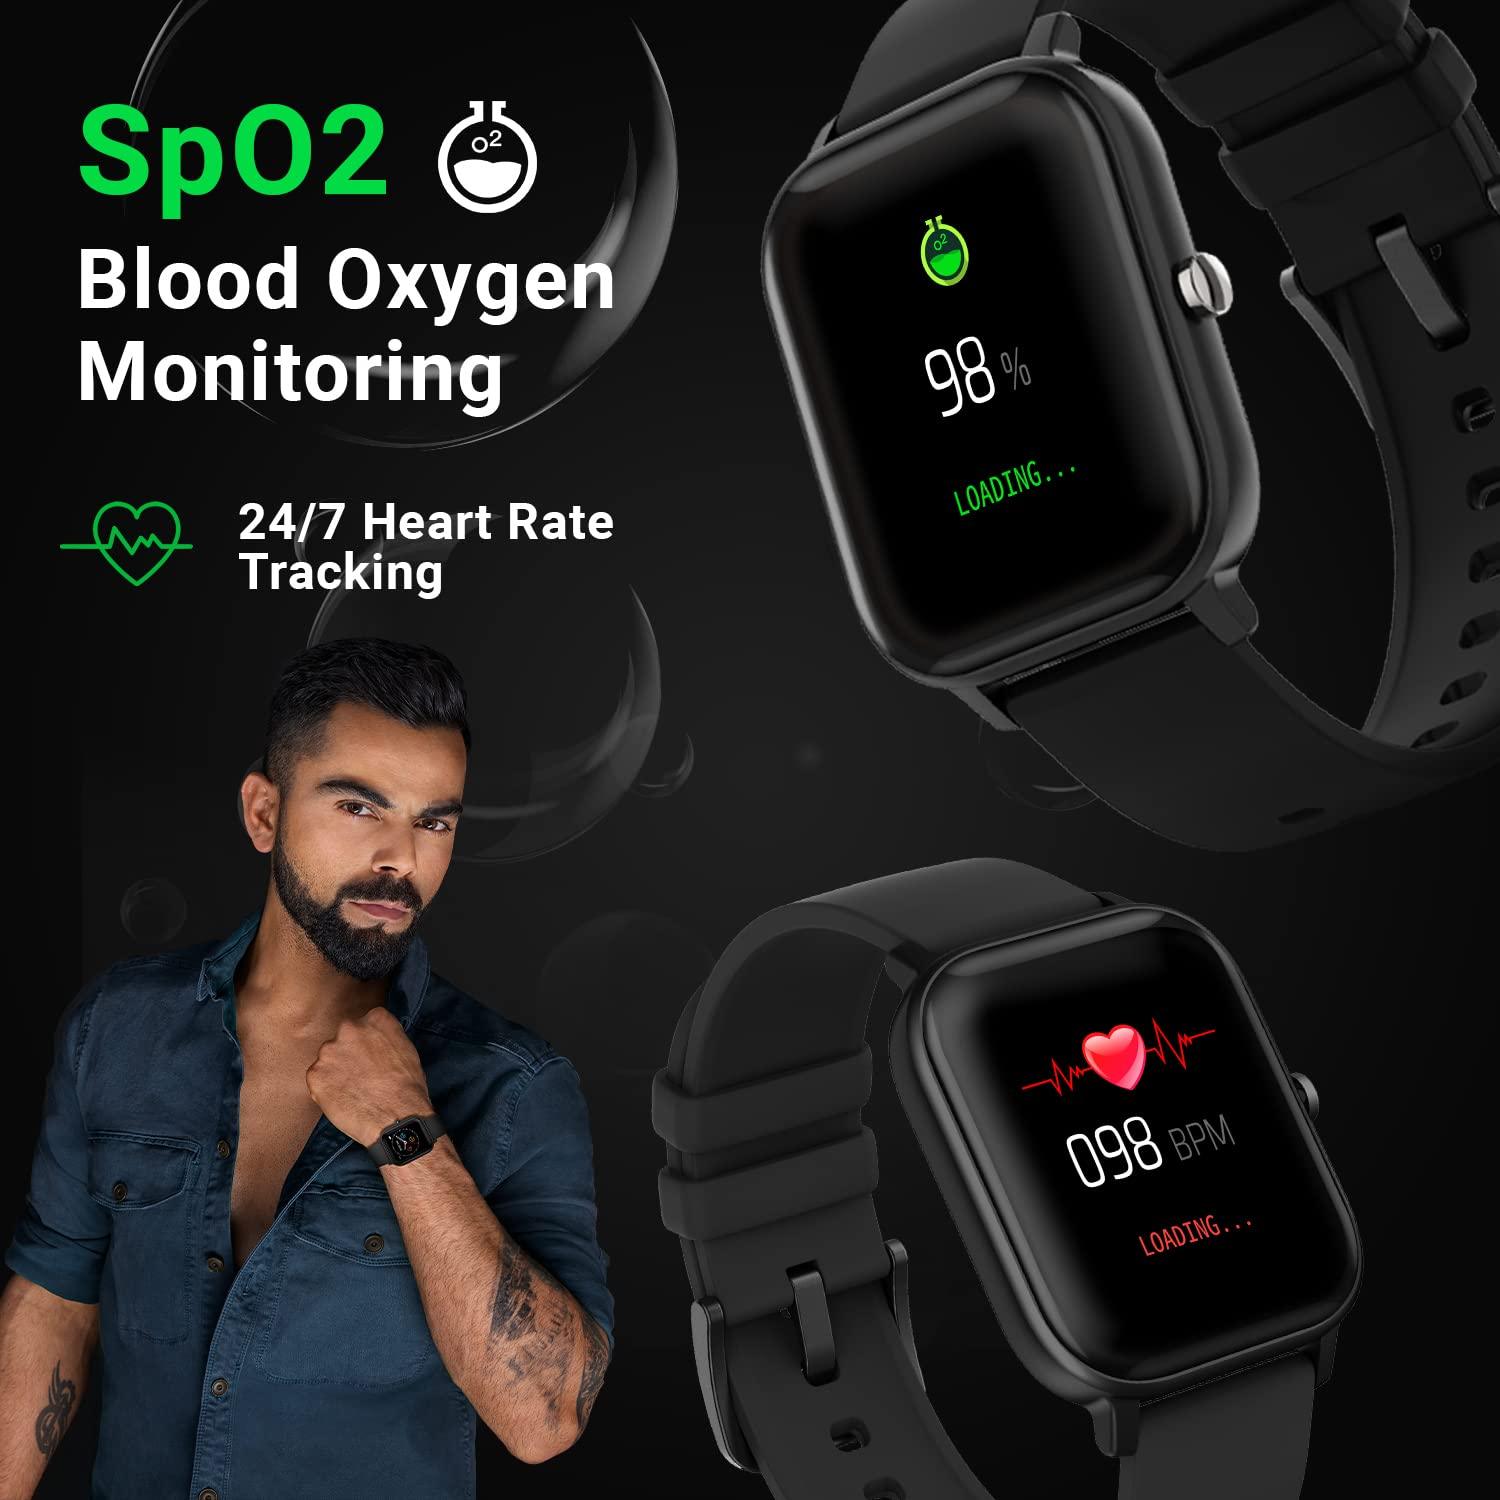 Fire-Boltt SpO2 Full Touch 1.4 inch Smart Watch 400 Nits Peak Brightness Metal Body 8 Days Battery Life with 24*7 Heart Rate monitoring IPX7 with Blood Oxygen, Fitness, Sports & Sleep Tracking (Black) - A - onBeli